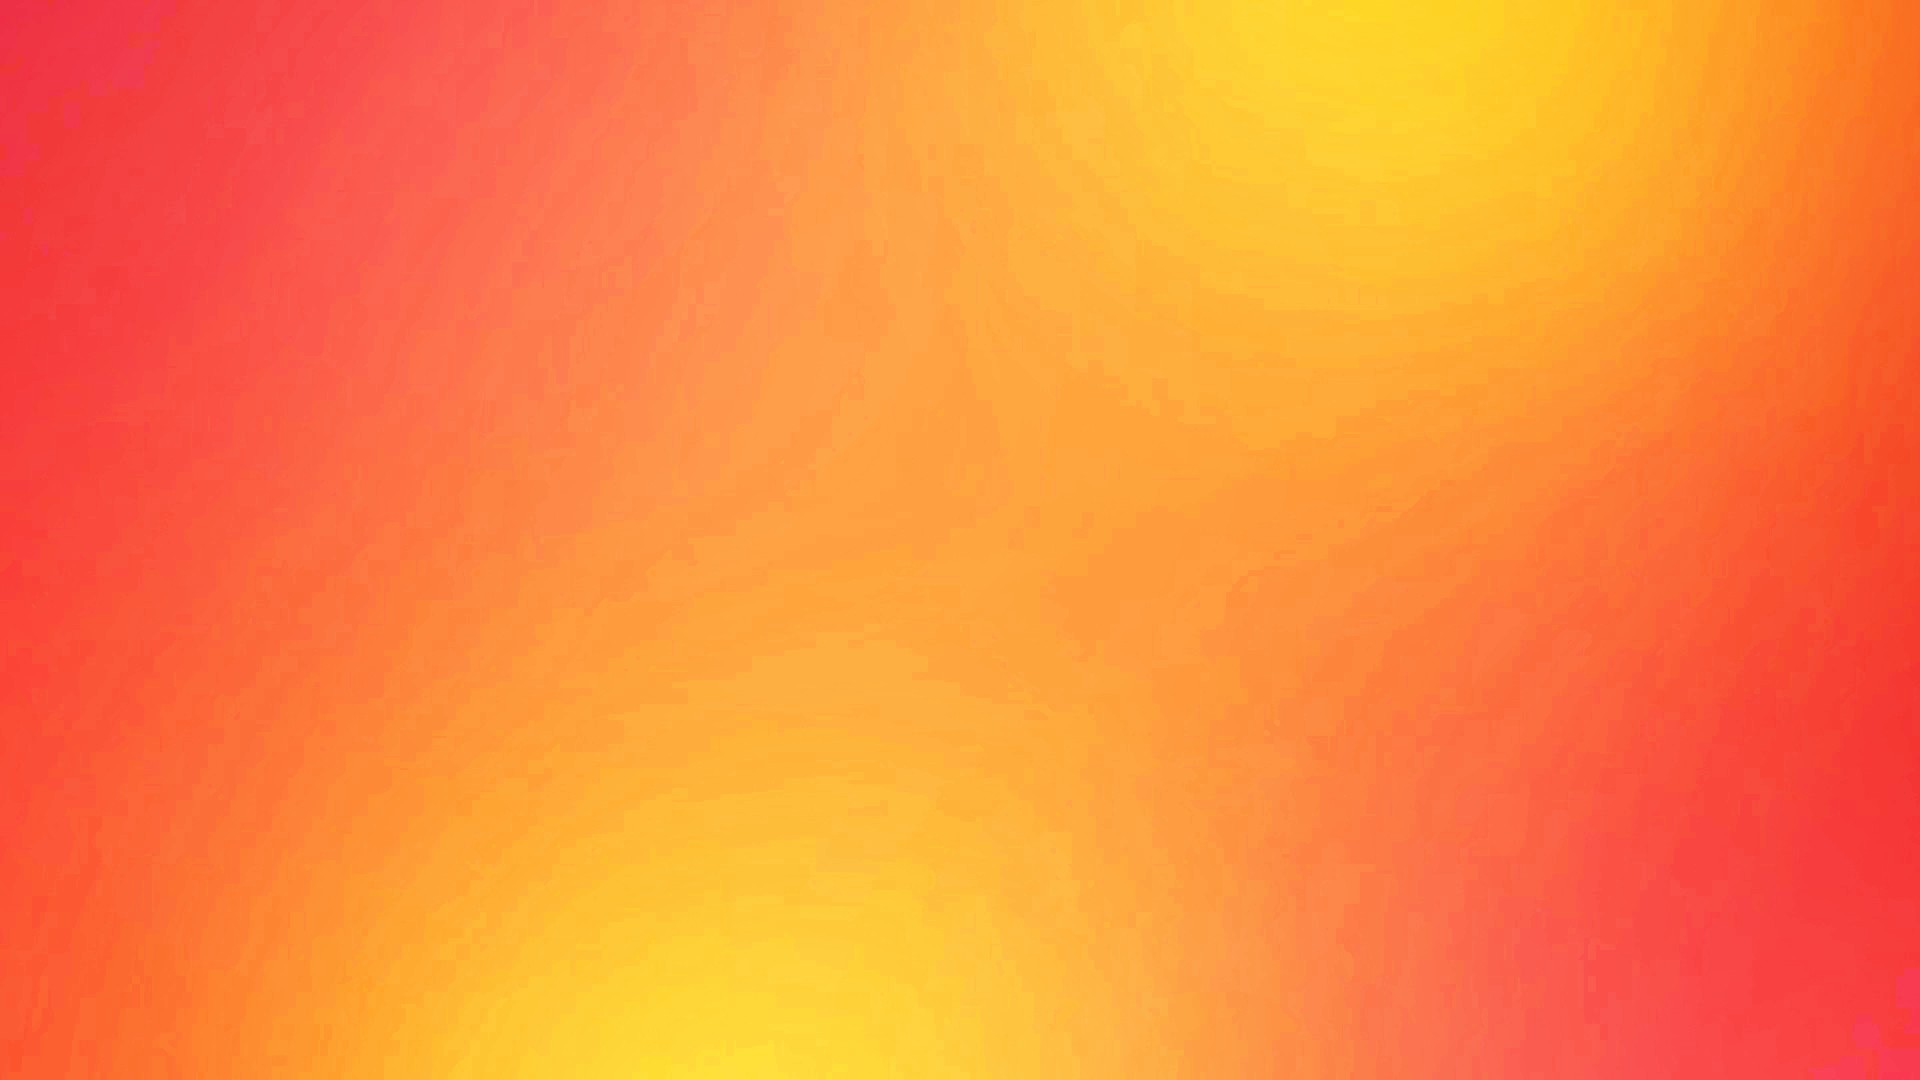 Pink And Yellow Gradient Abstract Wallpaper Image At Clker